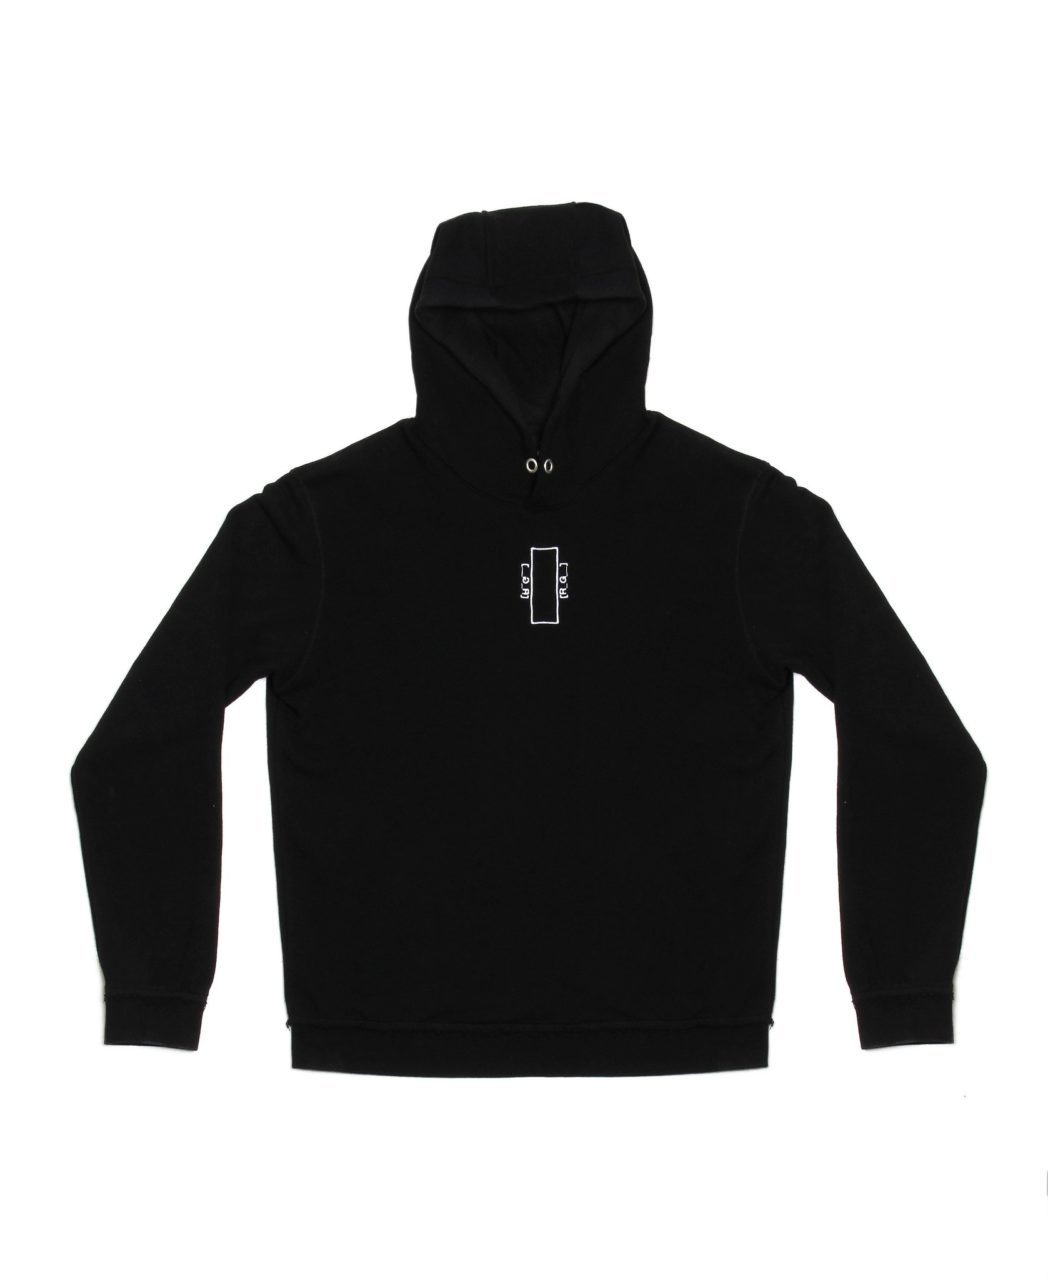 Hoodie collection - Rogue Sections | JDLsourcing - Partner in Asia